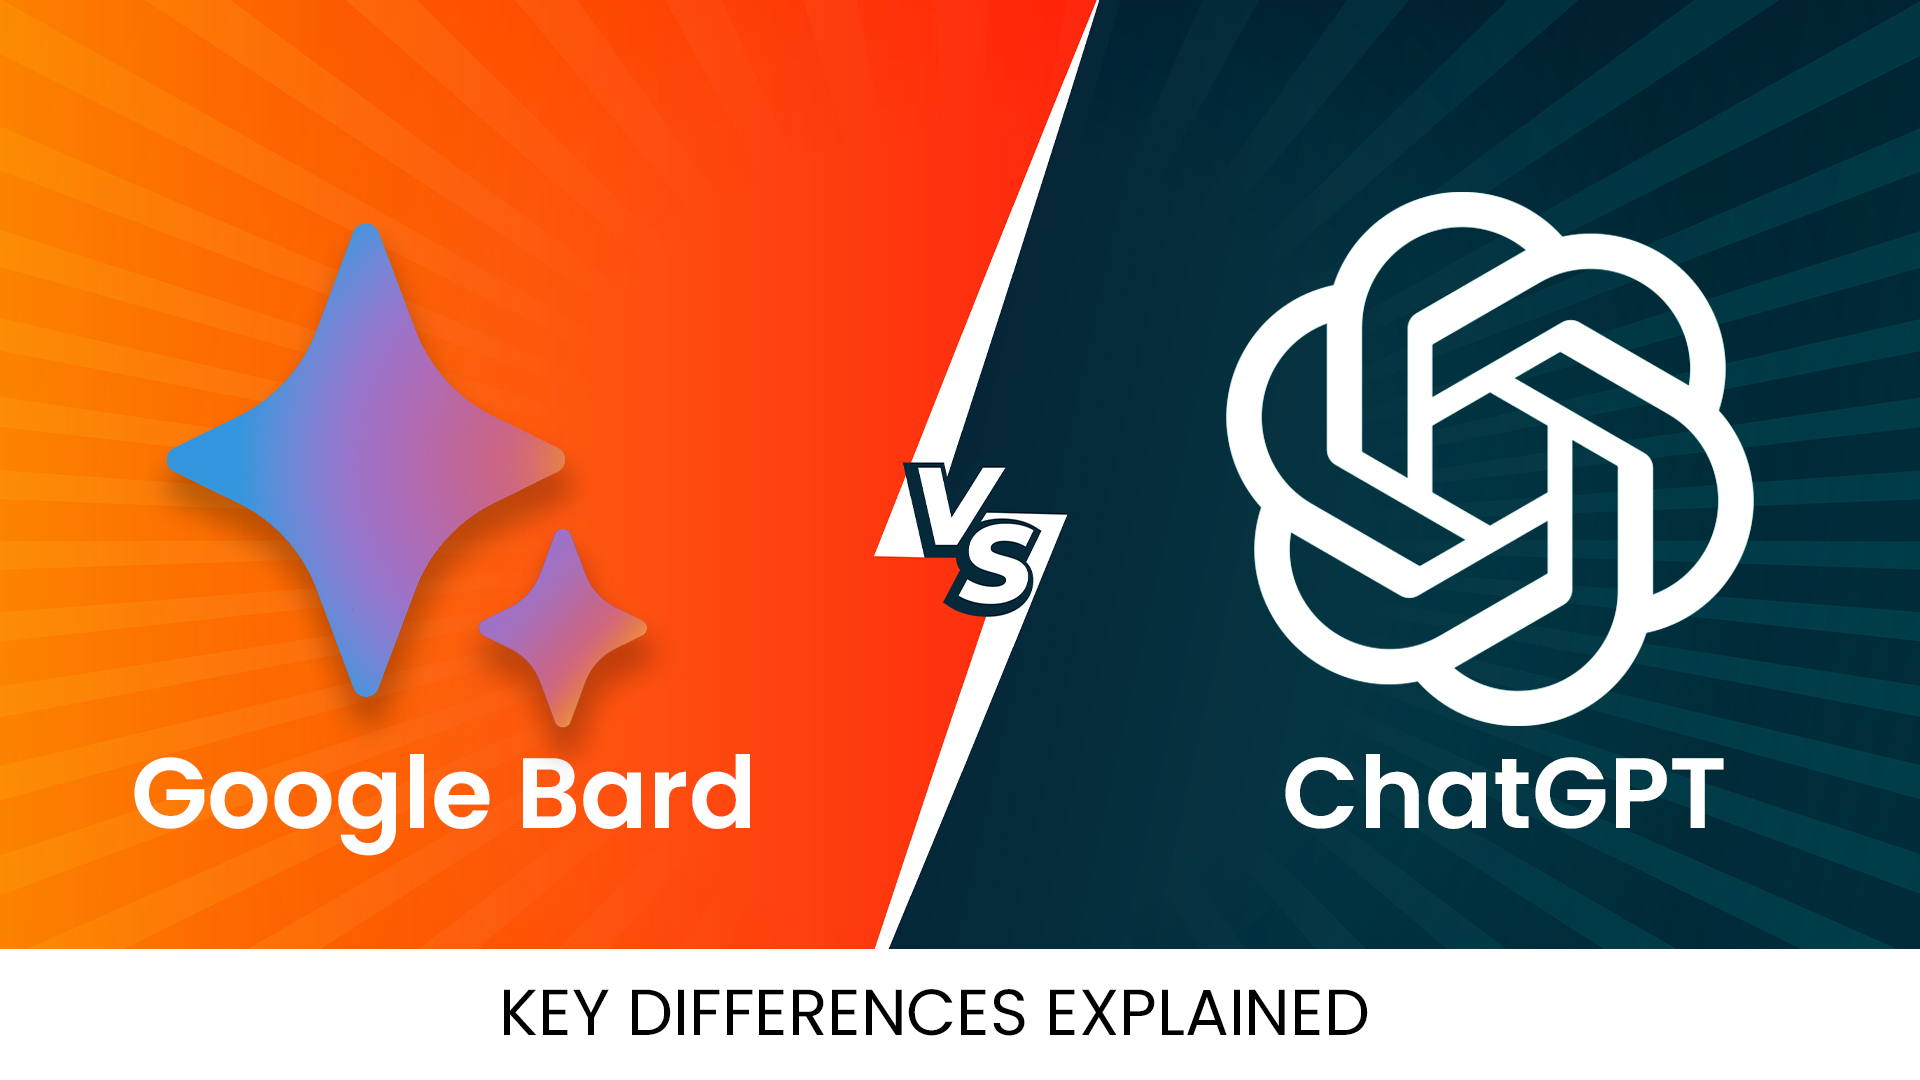 Google Bard Vs. ChatGPT - What’s The Difference?